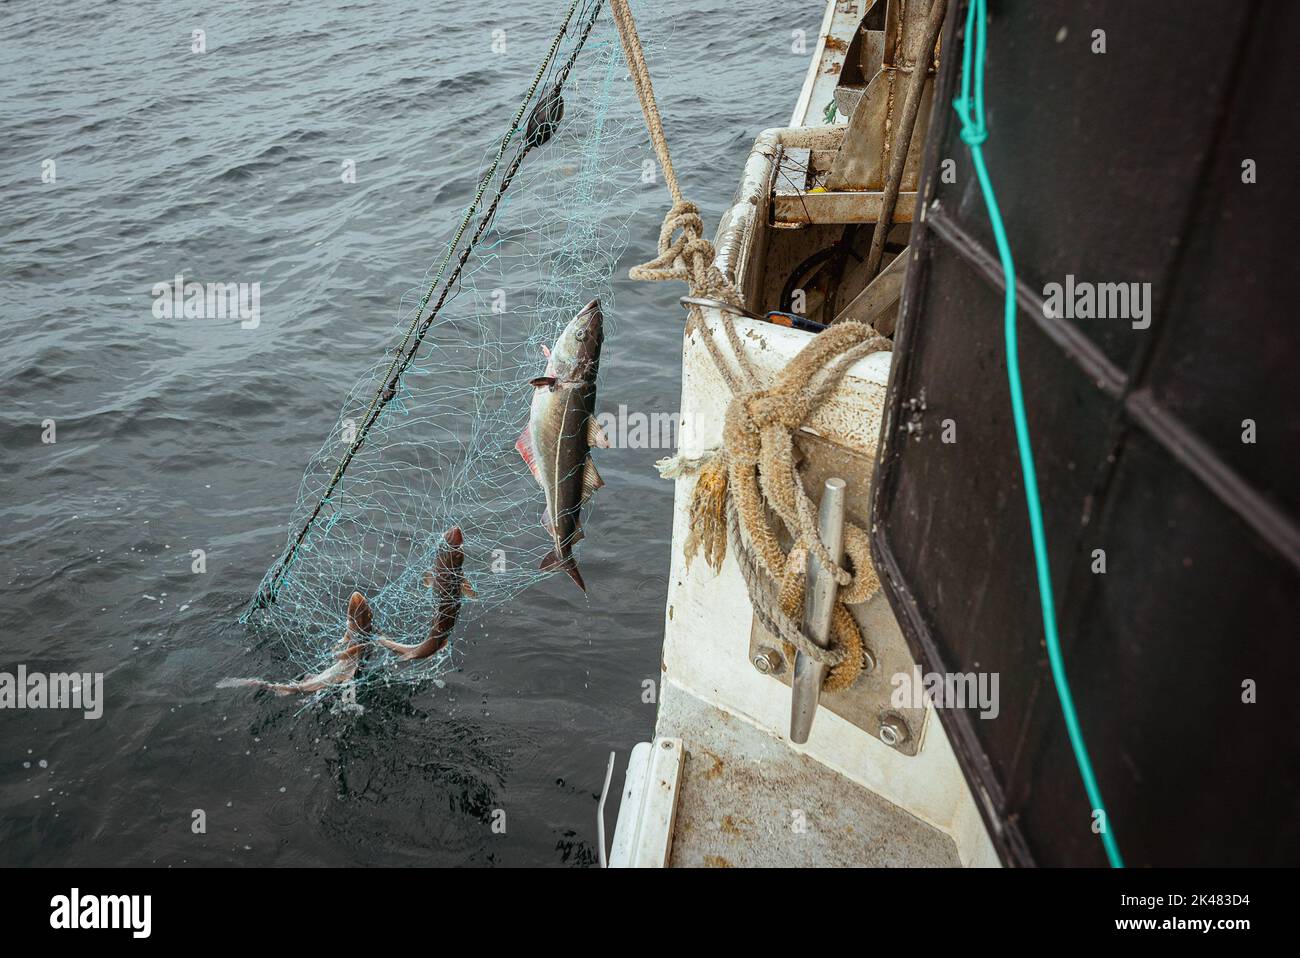 https://c8.alamy.com/comp/2K483D4/portland-maine-usa-27th-sep-2022-three-pollock-fish-caught-in-a-gillnet-fishing-net-being-hoisted-on-board-a-commercial-fishing-boat-off-the-coast-of-maine-a-board-a-gillnet-fishing-boat-crew-haul-their-catch-of-monkfish-pollock-and-cod-from-the-early-hours-of-the-morning-until-late-at-night-the-fishing-industry-in-maine-has-recently-taken-a-blow-with-a-new-set-of-restrictions-on-fishing-and-the-environmental-organization-seafood-watch-recommending-for-people-to-avoid-eating-american-lobster-this-listing-and-regulation-pose-fresh-threats-to-fishers-livelihoods-while-f-2K483D4.jpg